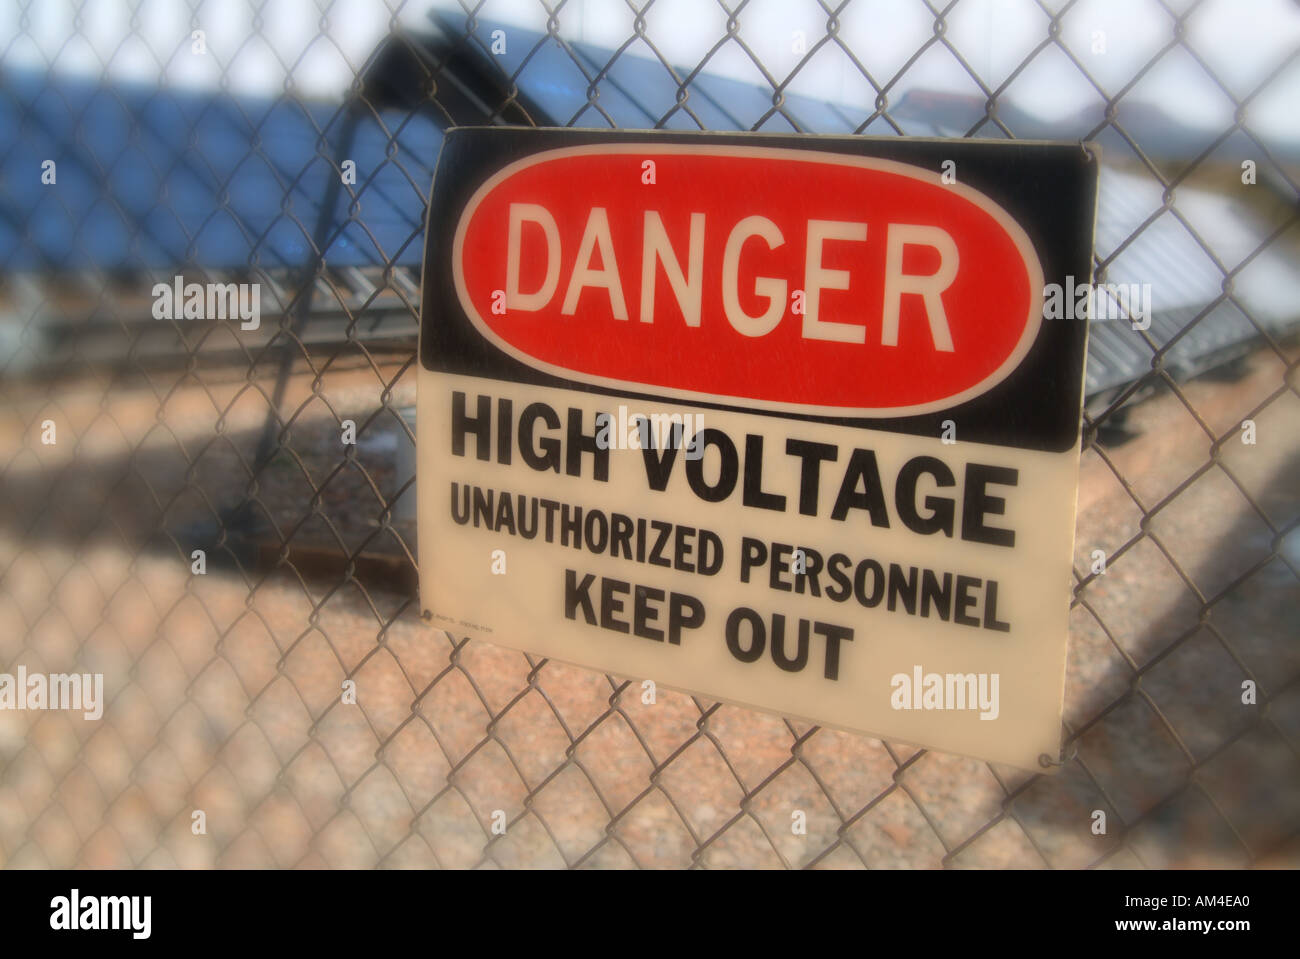 danger sign outside a fenced high voltage area Stock Photo